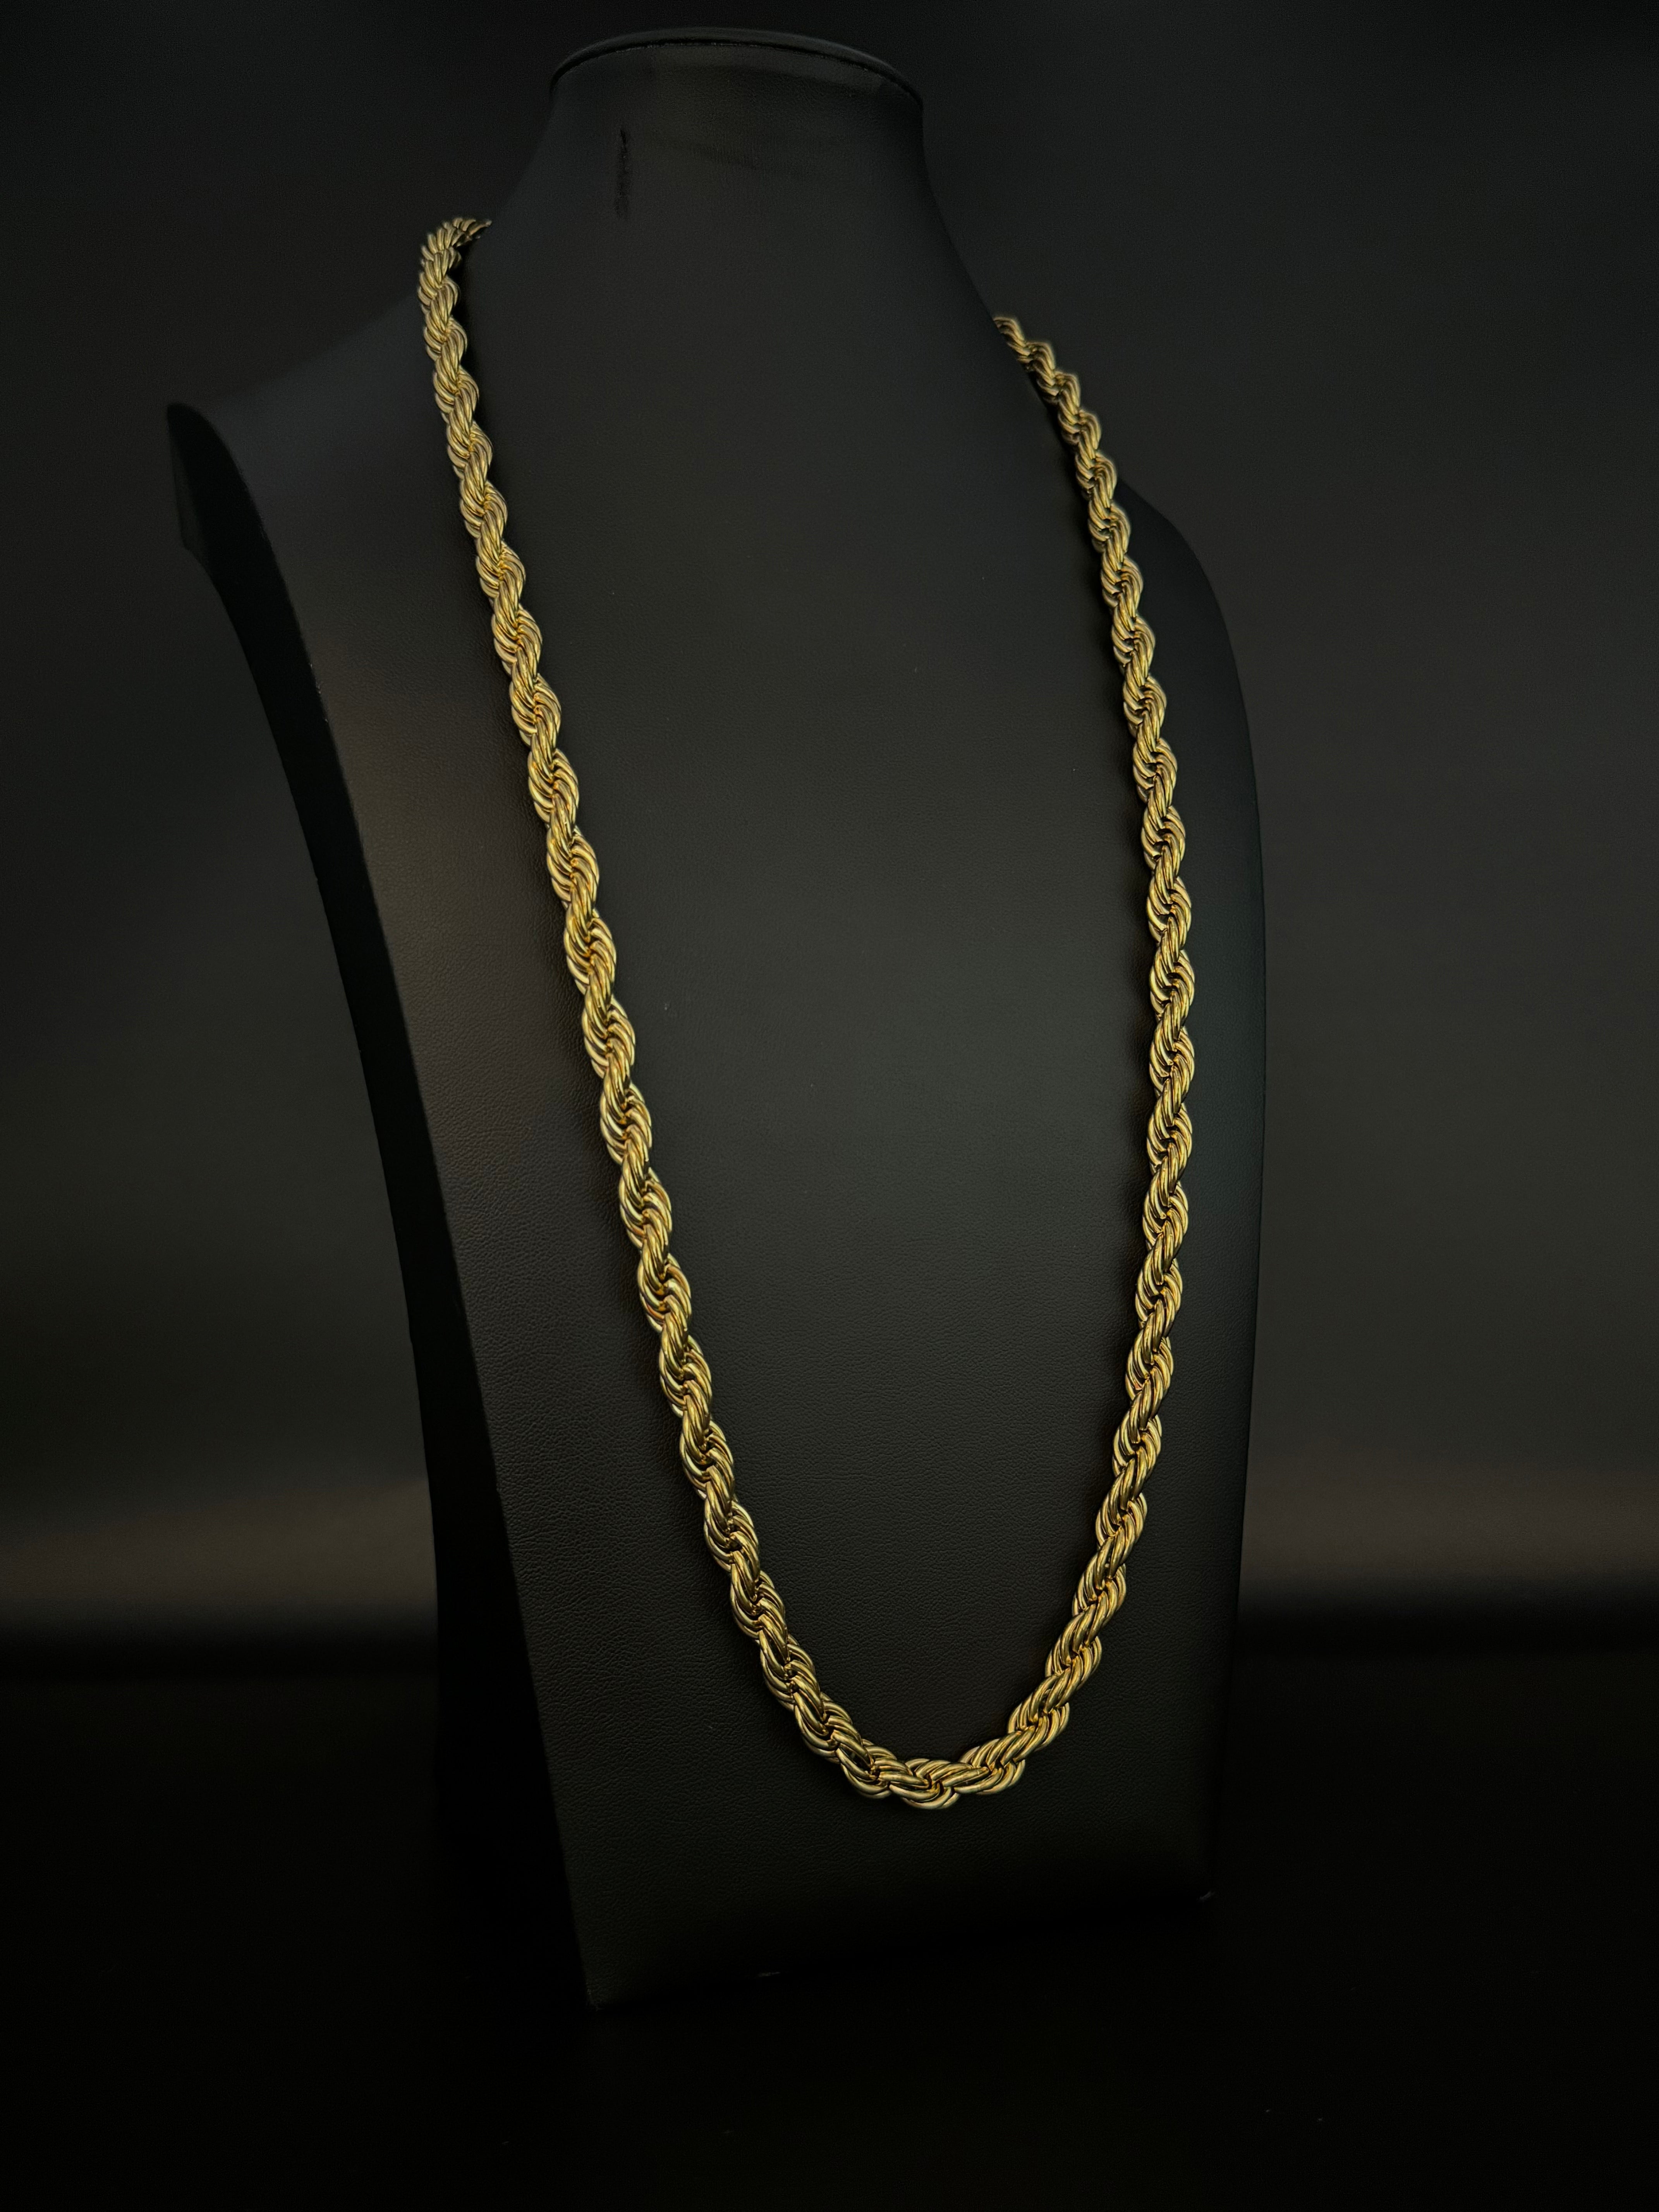 9ct Gold Filled Rope Chain 8mm 30 inches